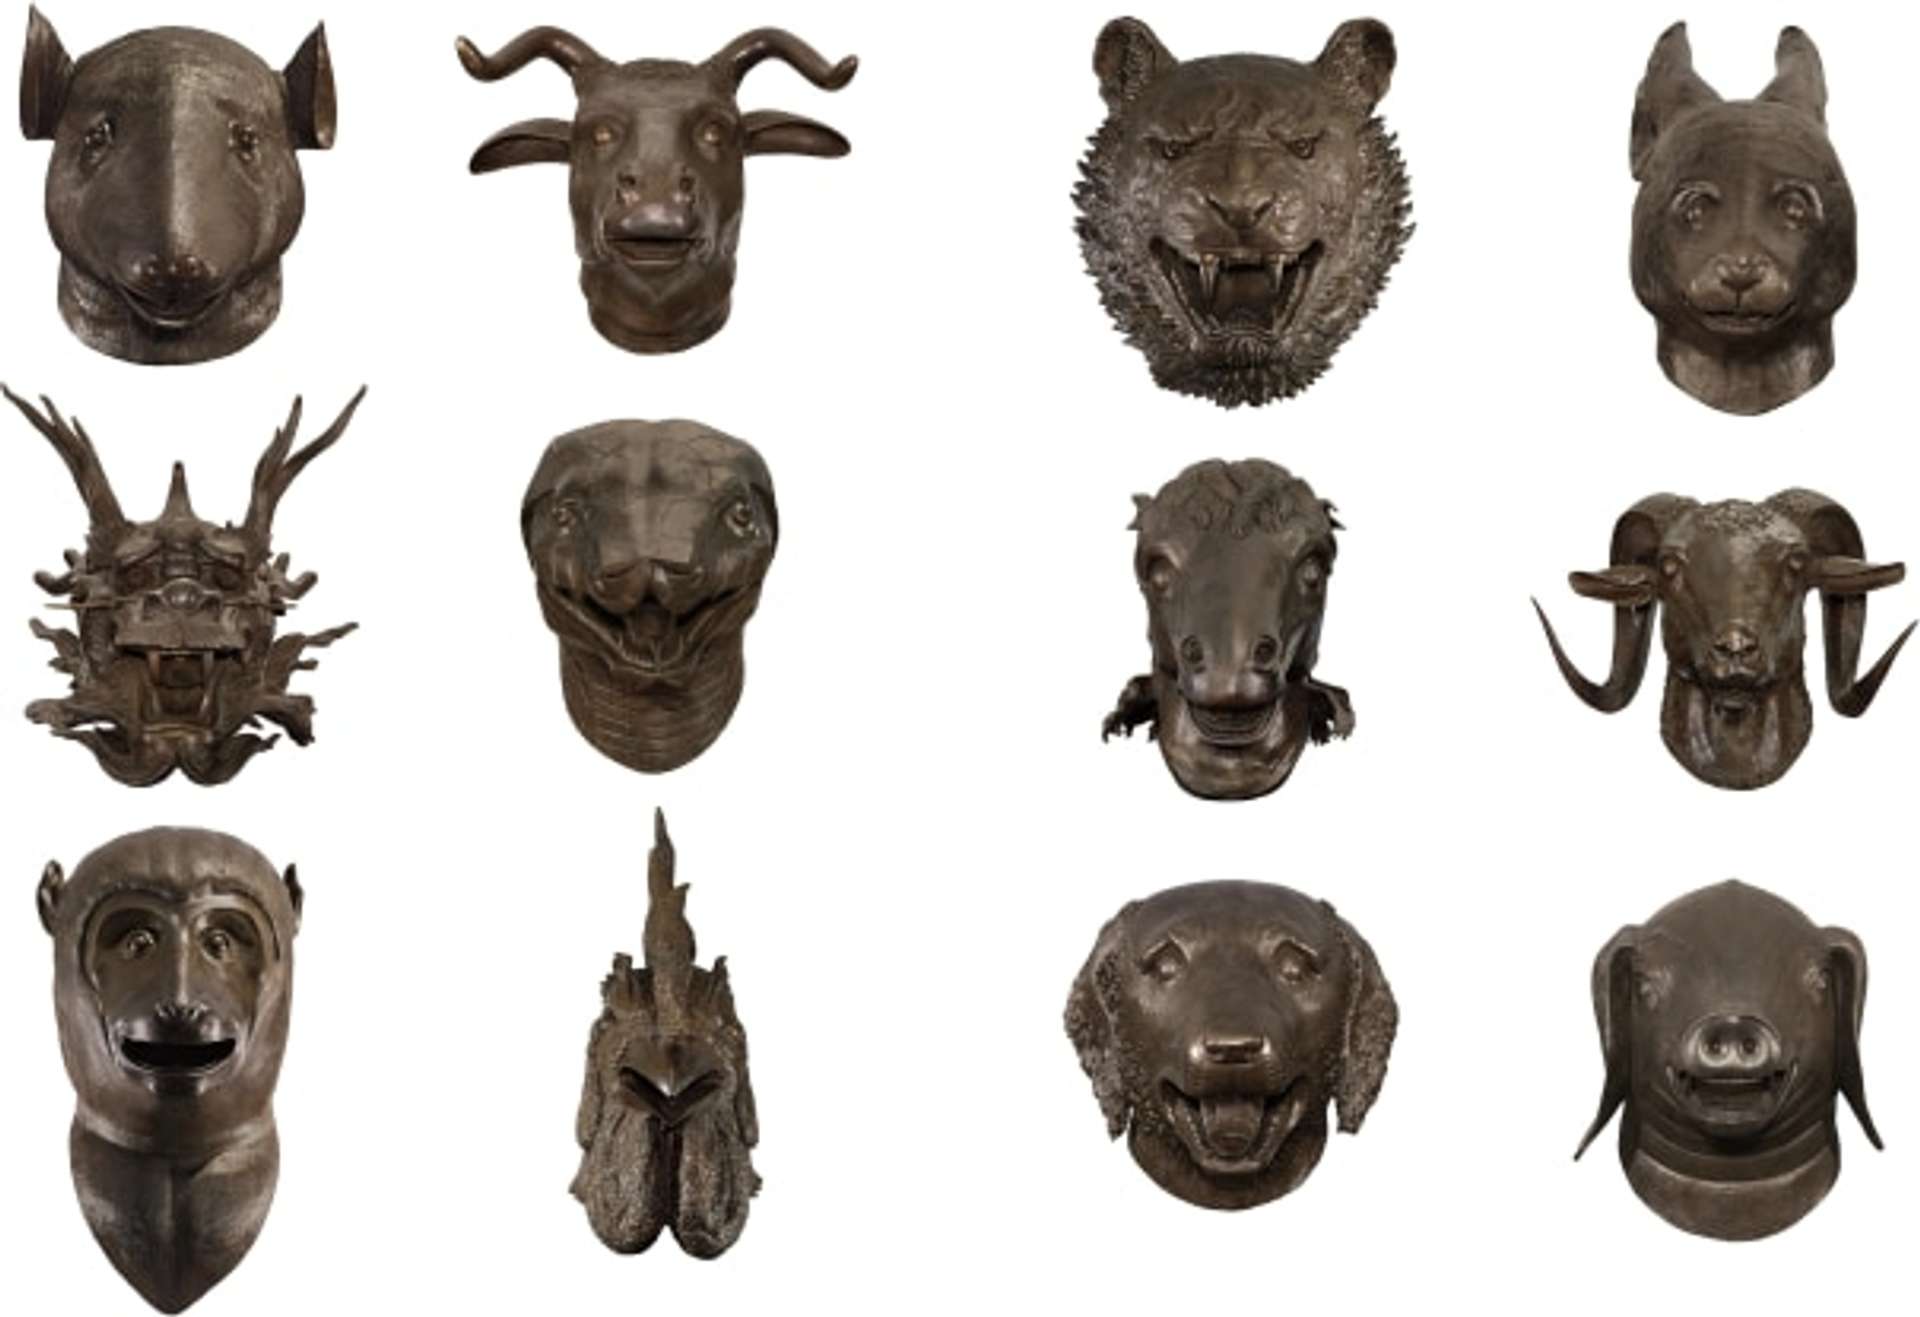  A photograph of twelve bronze sculpted heads arranged in three rows, with four animals in each row. The sculptures represent the figures of the Chinese zodiac. From the top left corner, the animals are: rat, ox, tiger, rabbit, dragon, snake, horse, goat, monkey, rooster, dog, and pig.